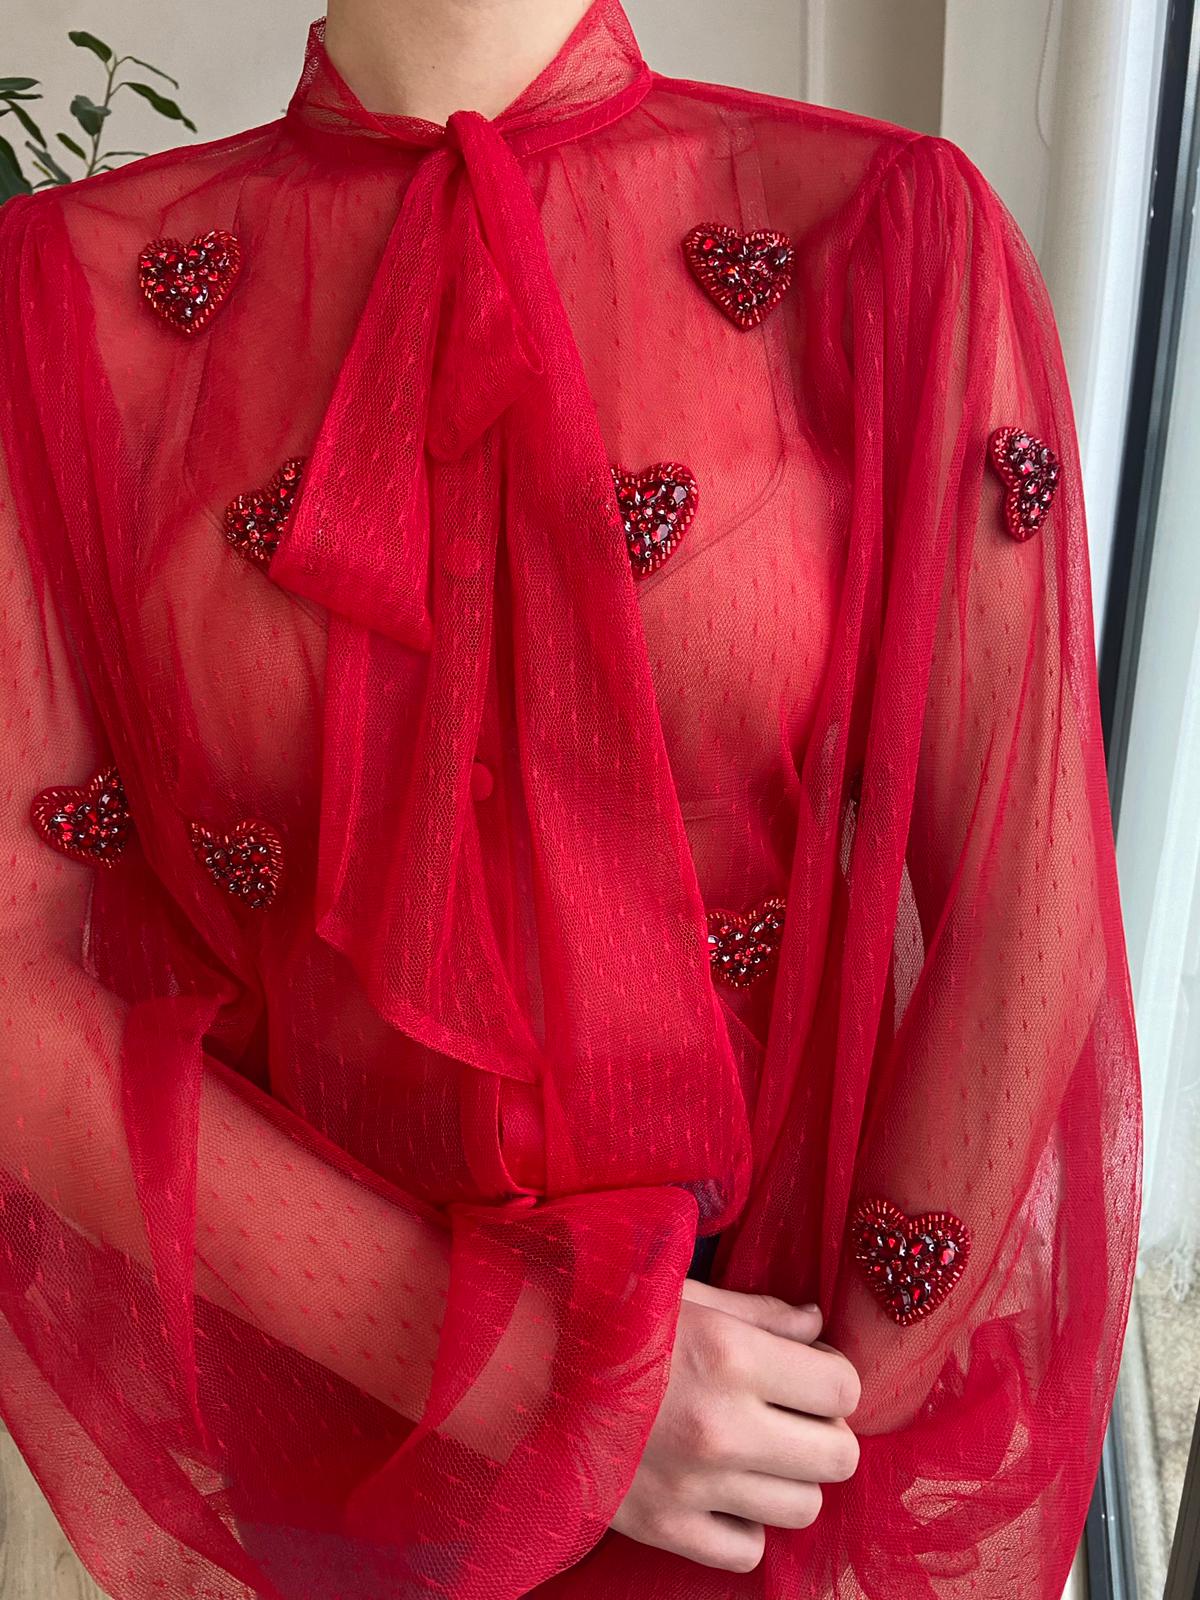 Red blouse with embroidered hearts